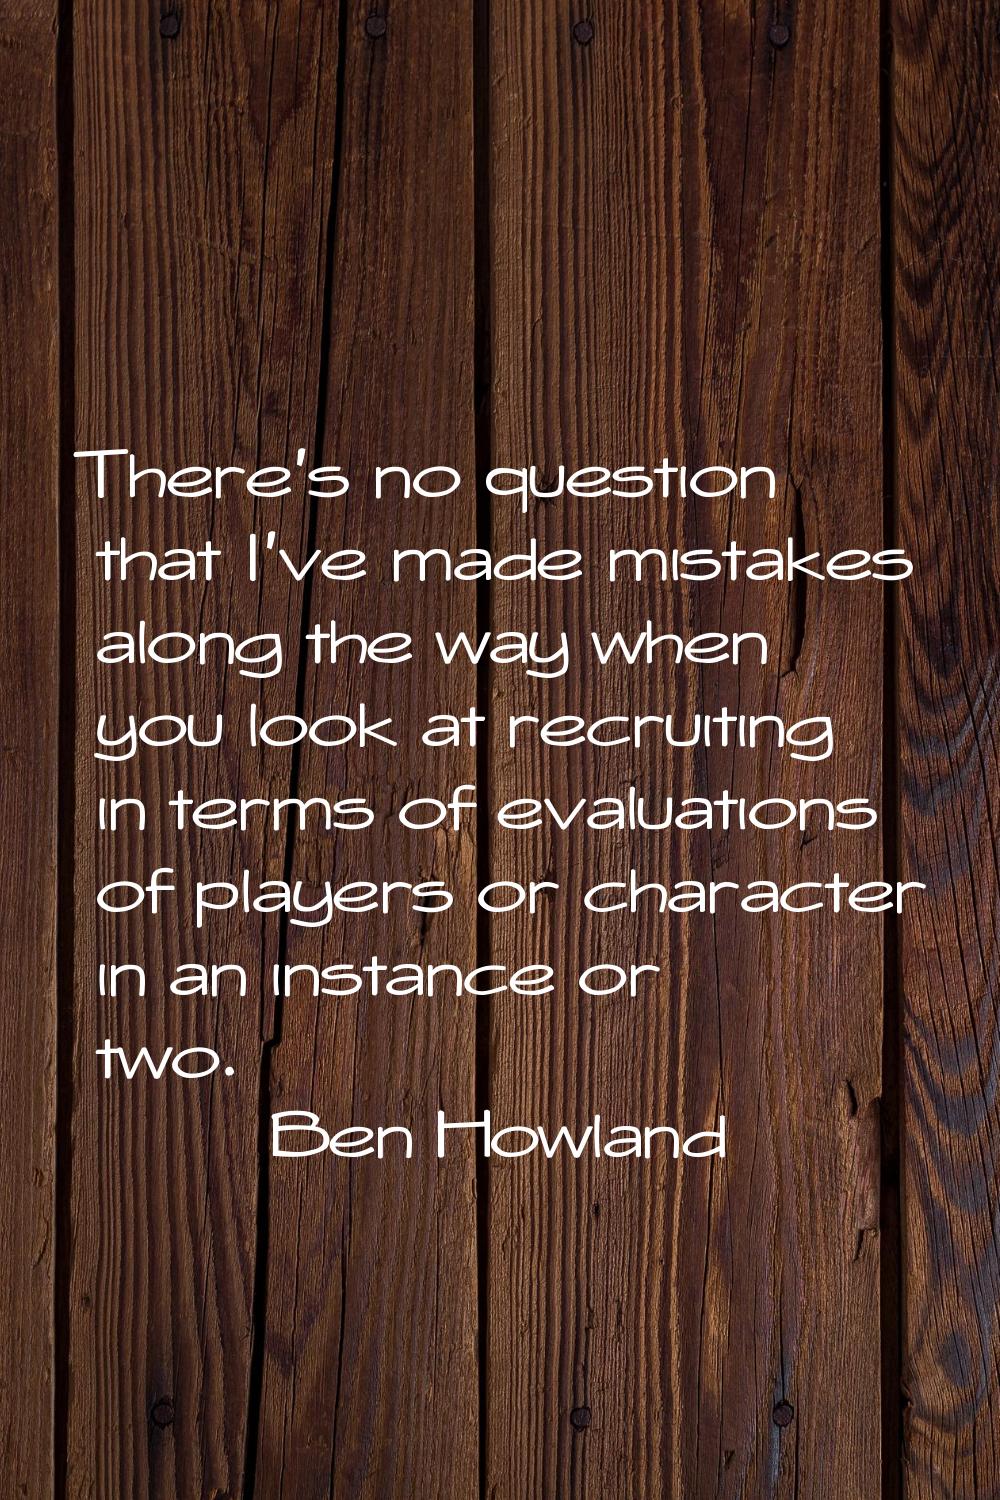 There's no question that I've made mistakes along the way when you look at recruiting in terms of e